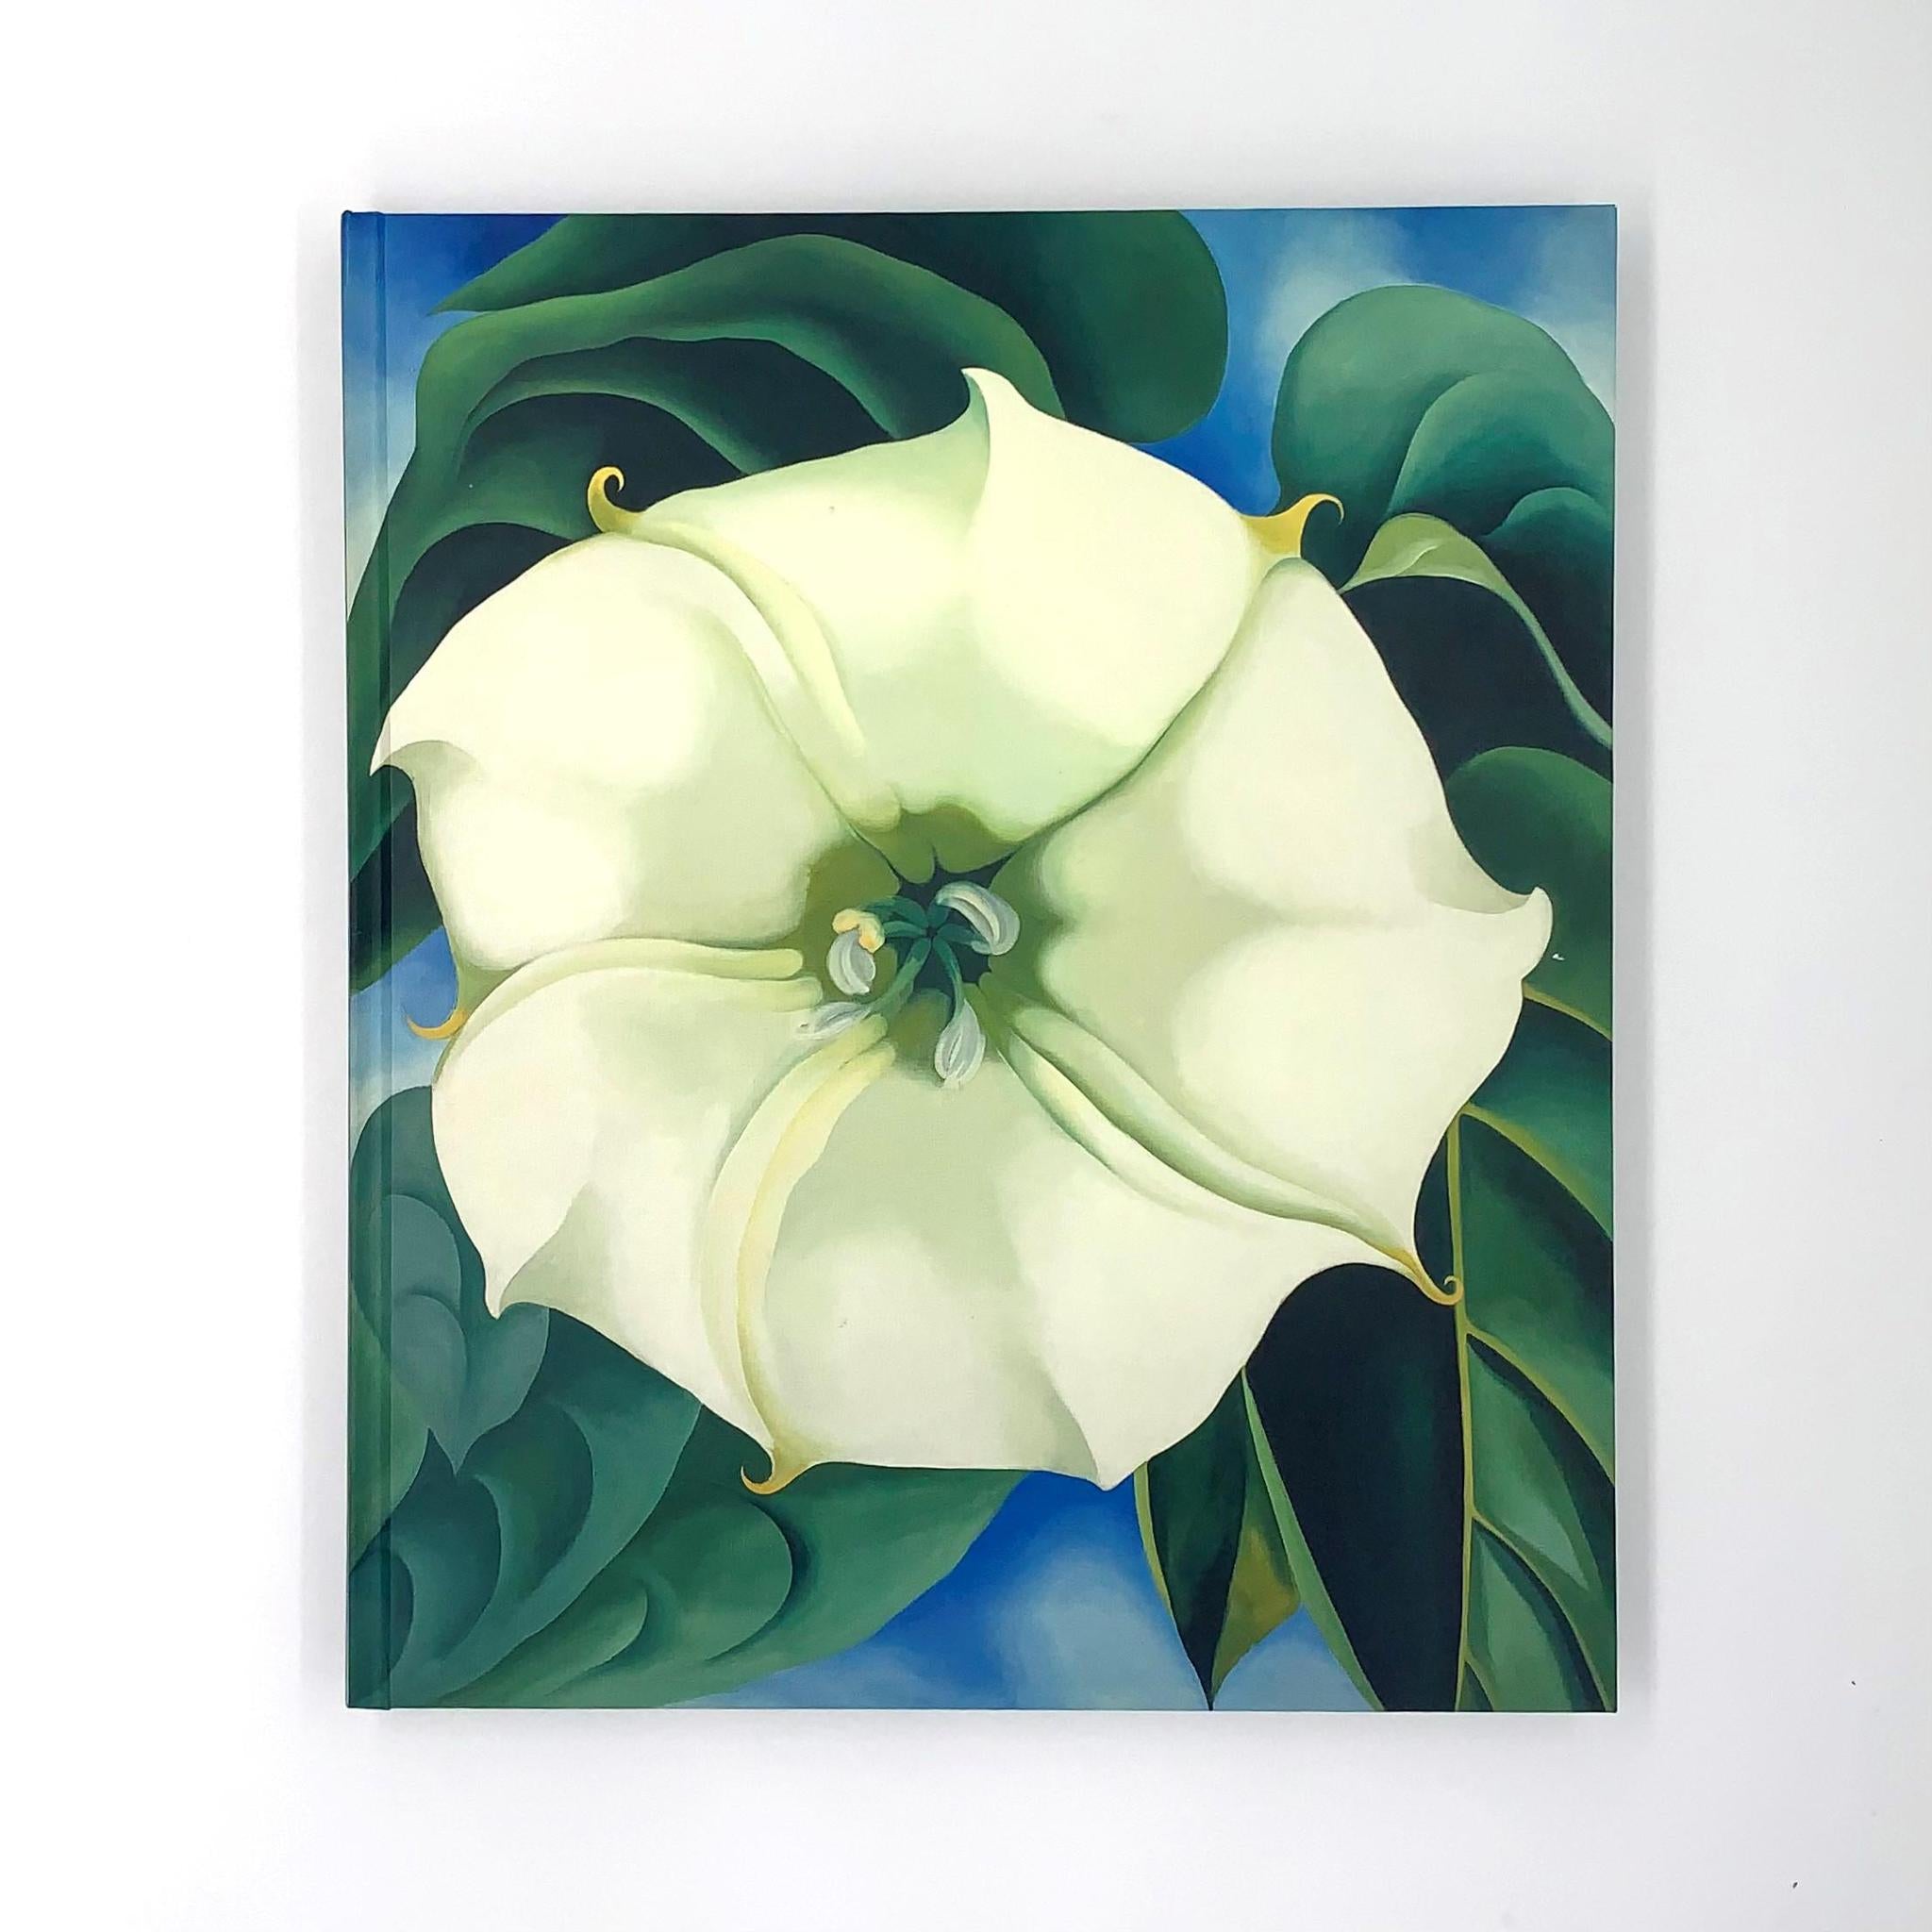 Georgia O'Keeffe 100 Flowers – The Store at the Norton Museum of Art